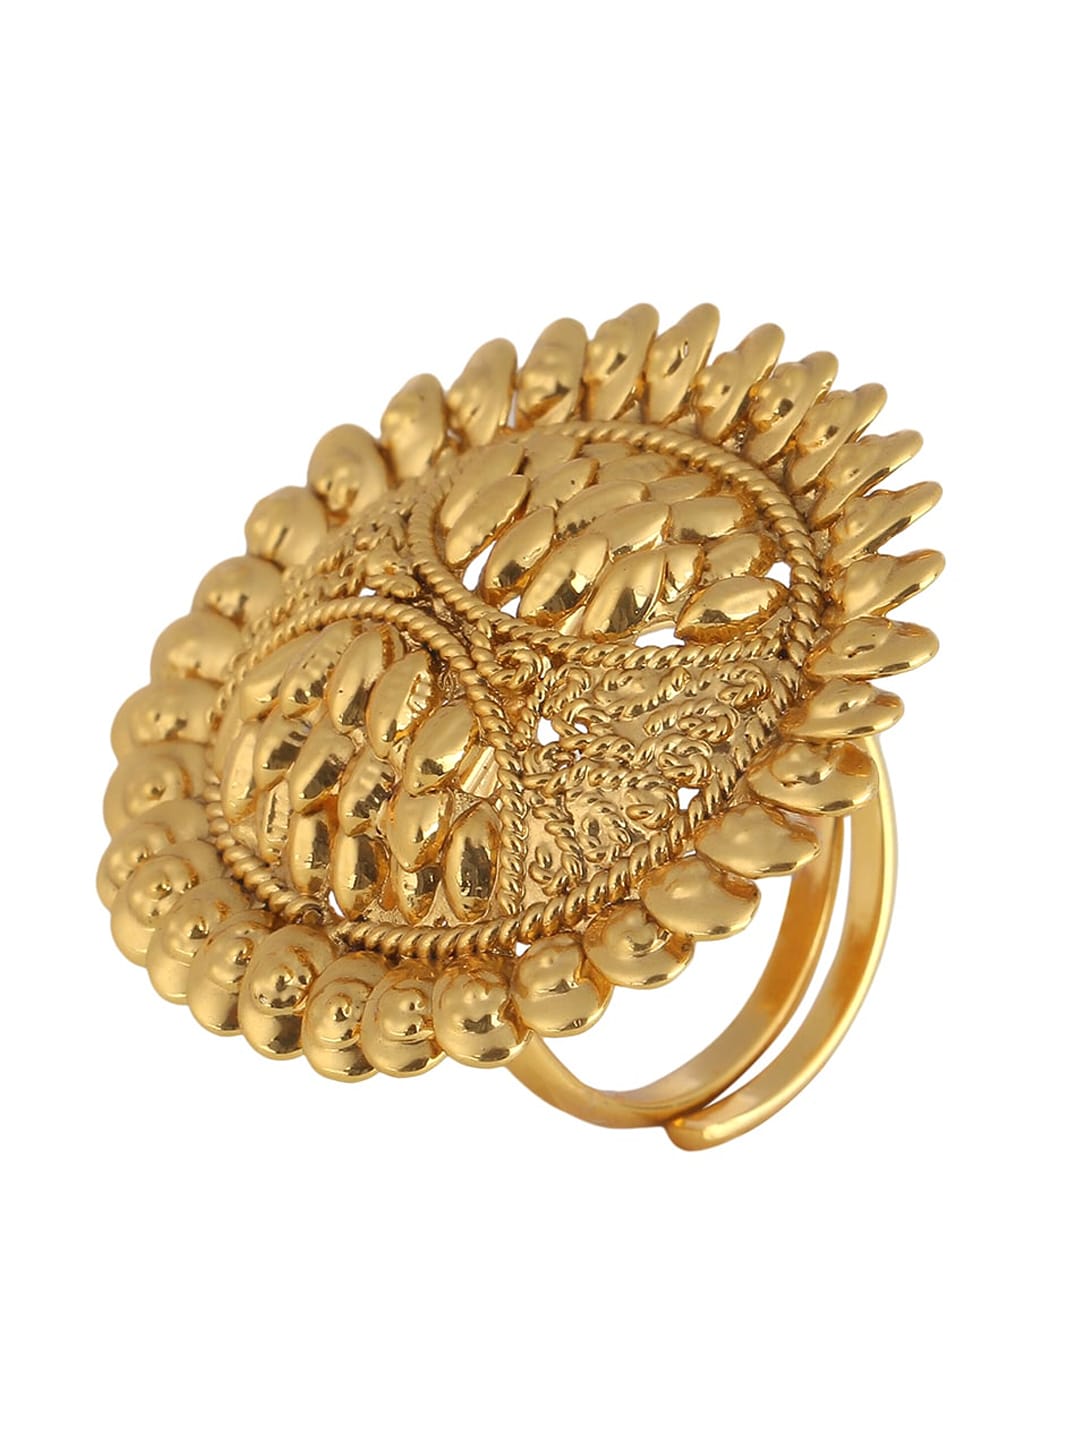 Adwitiya Collection 24 CT Gold-Plated Adjustable Handcrafted Finger Ring Price in India